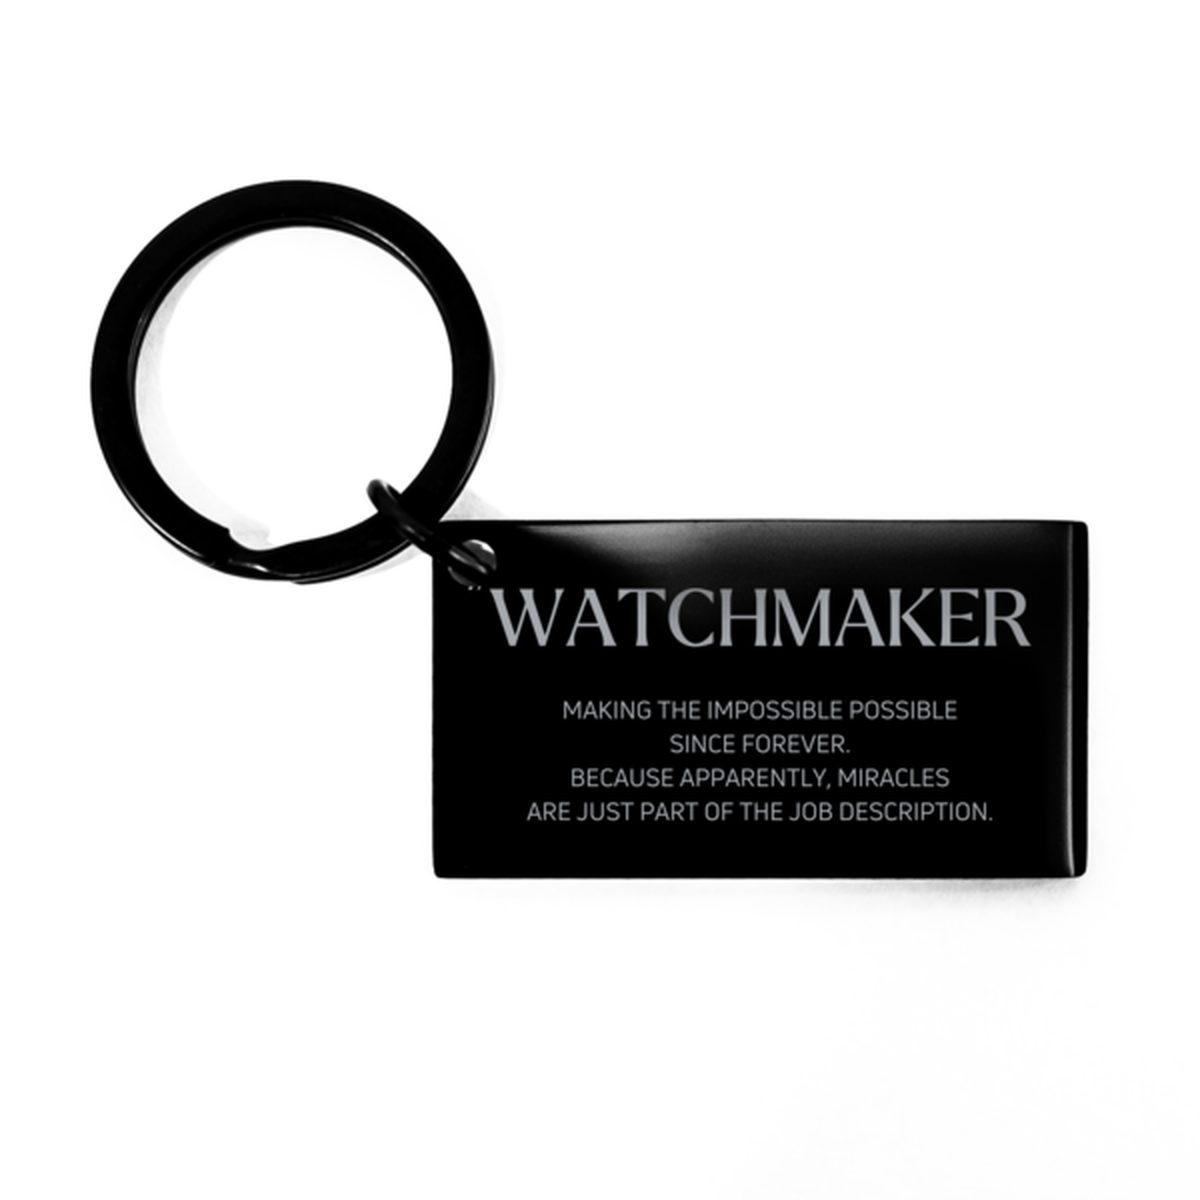 Funny Watchmaker Gifts, Miracles are just part of the job description, Inspirational Birthday Keychain For Watchmaker, Men, Women, Coworkers, Friends, Boss